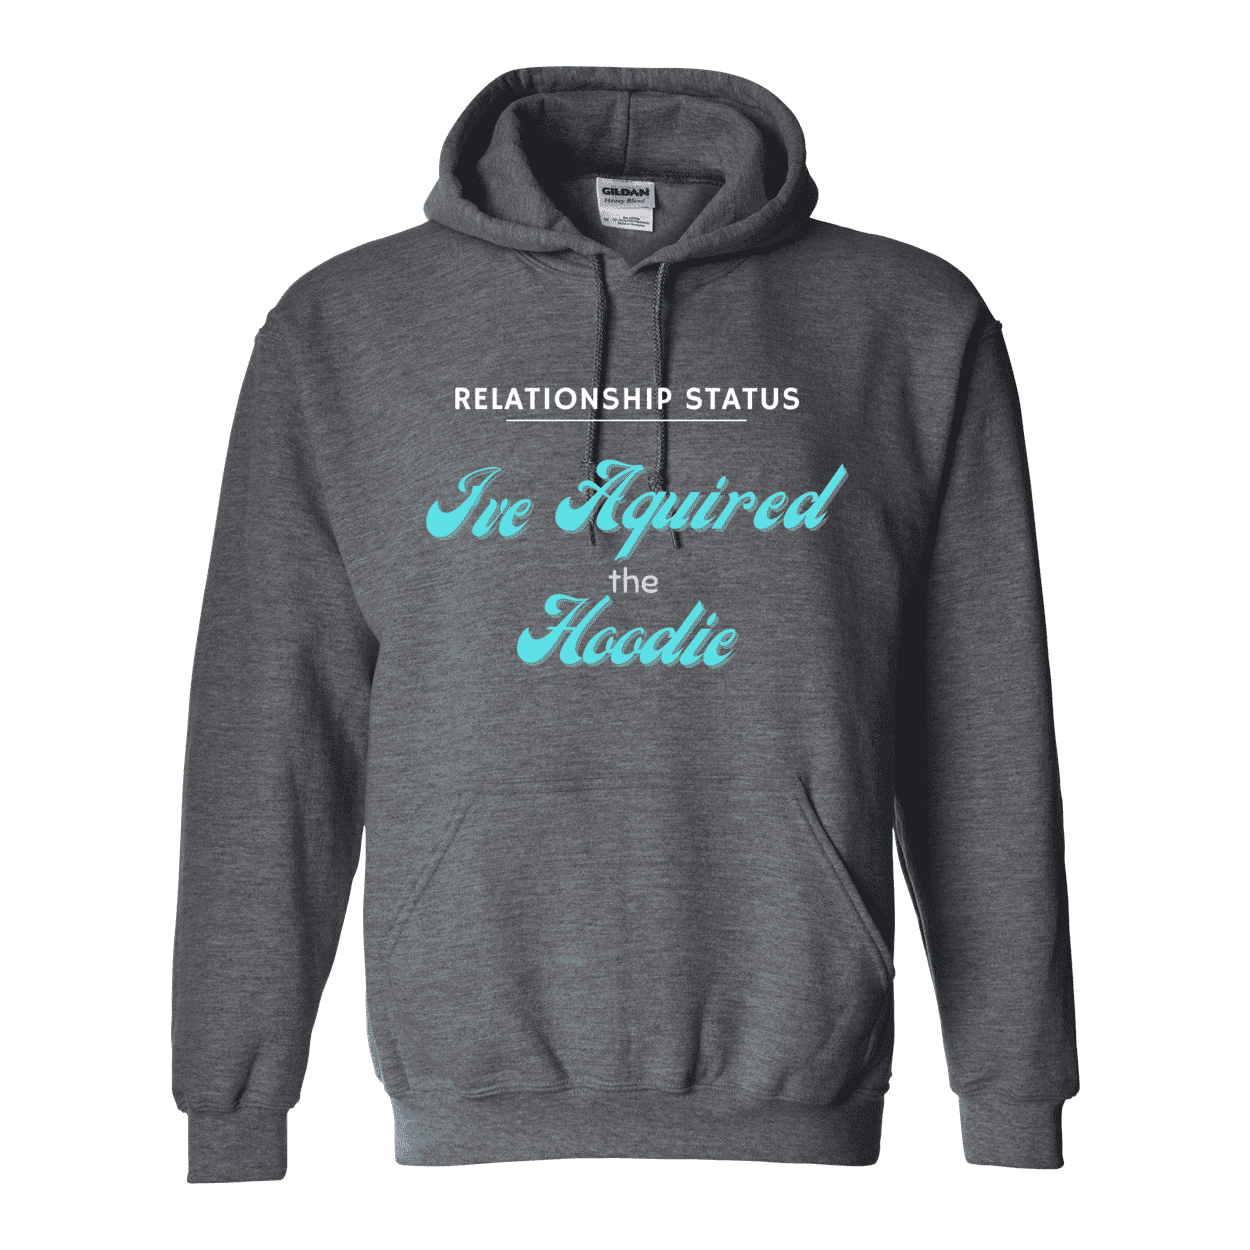 Women's Funny Relationship Status Acquired the Hoodie Heavy Blend Hooded Sweatshirt